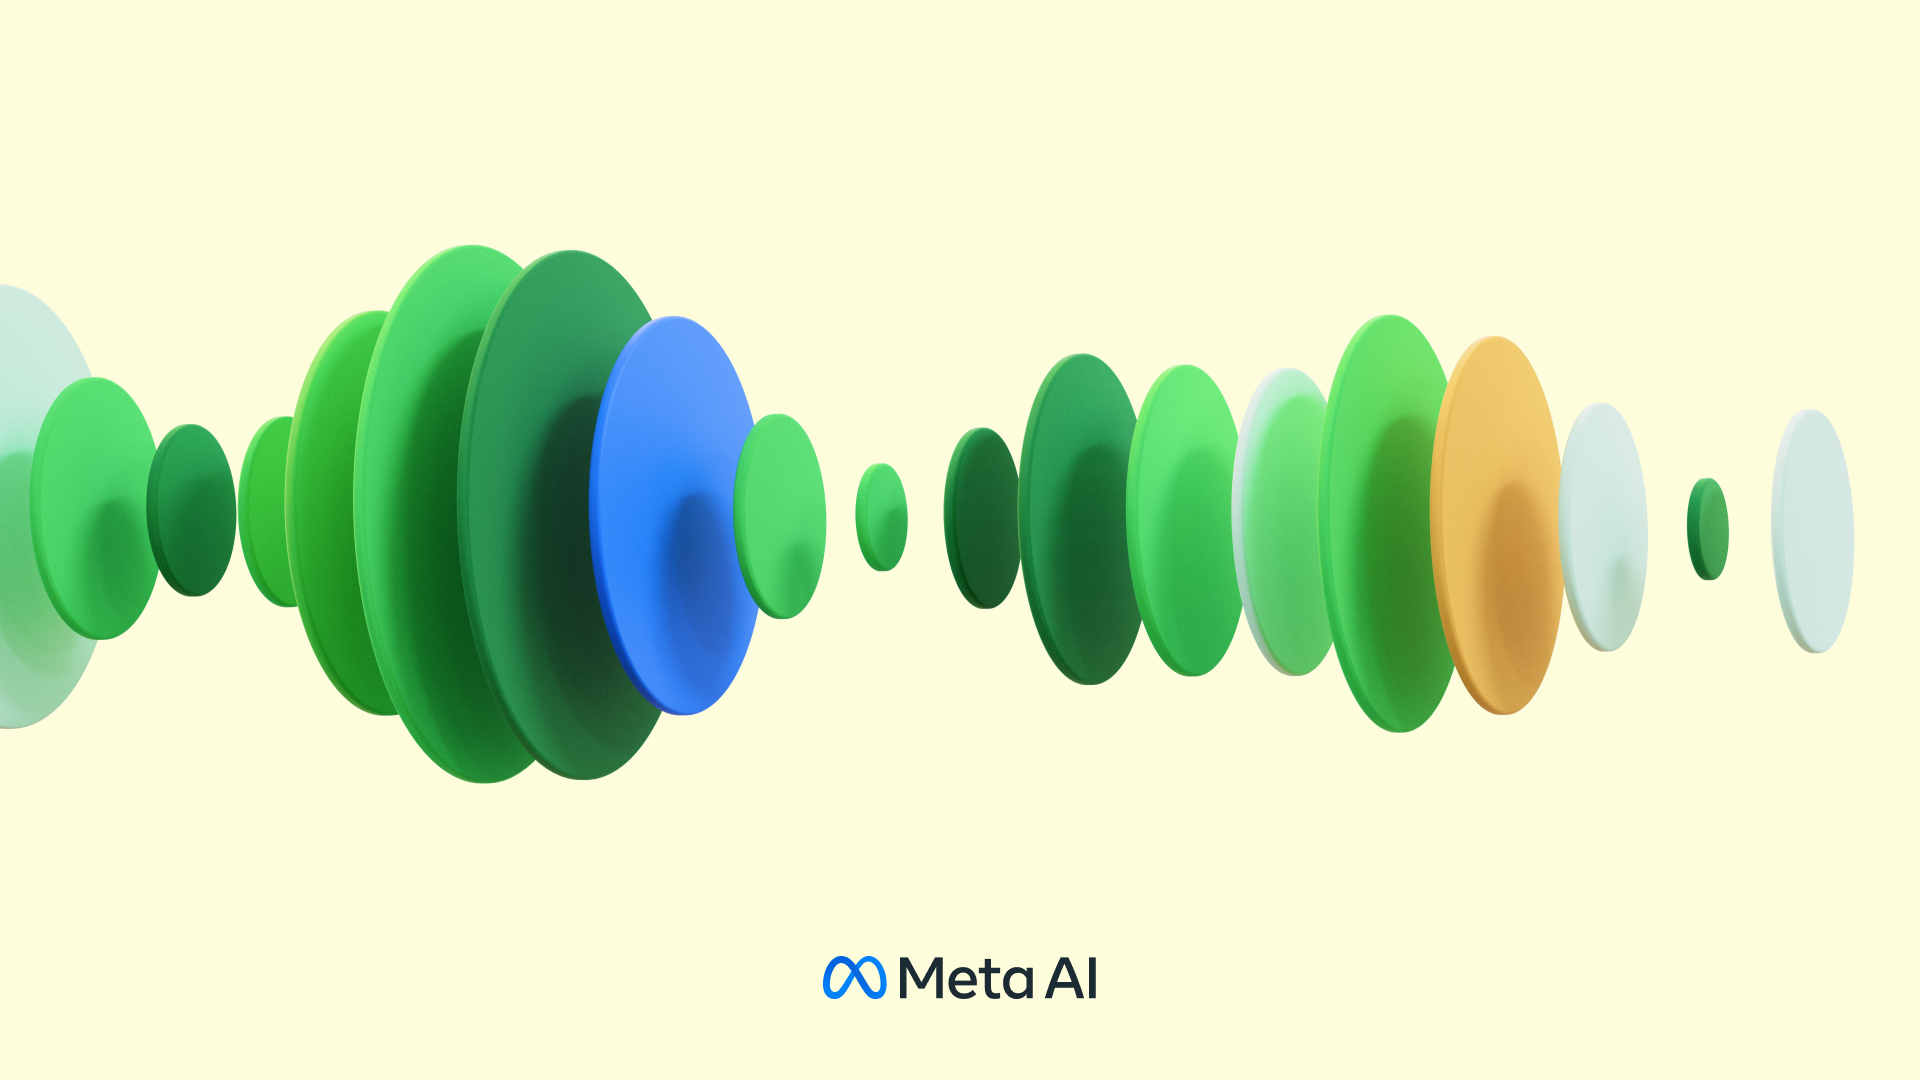 Meta has developed a generative artificial intelligence model for text-to-speech